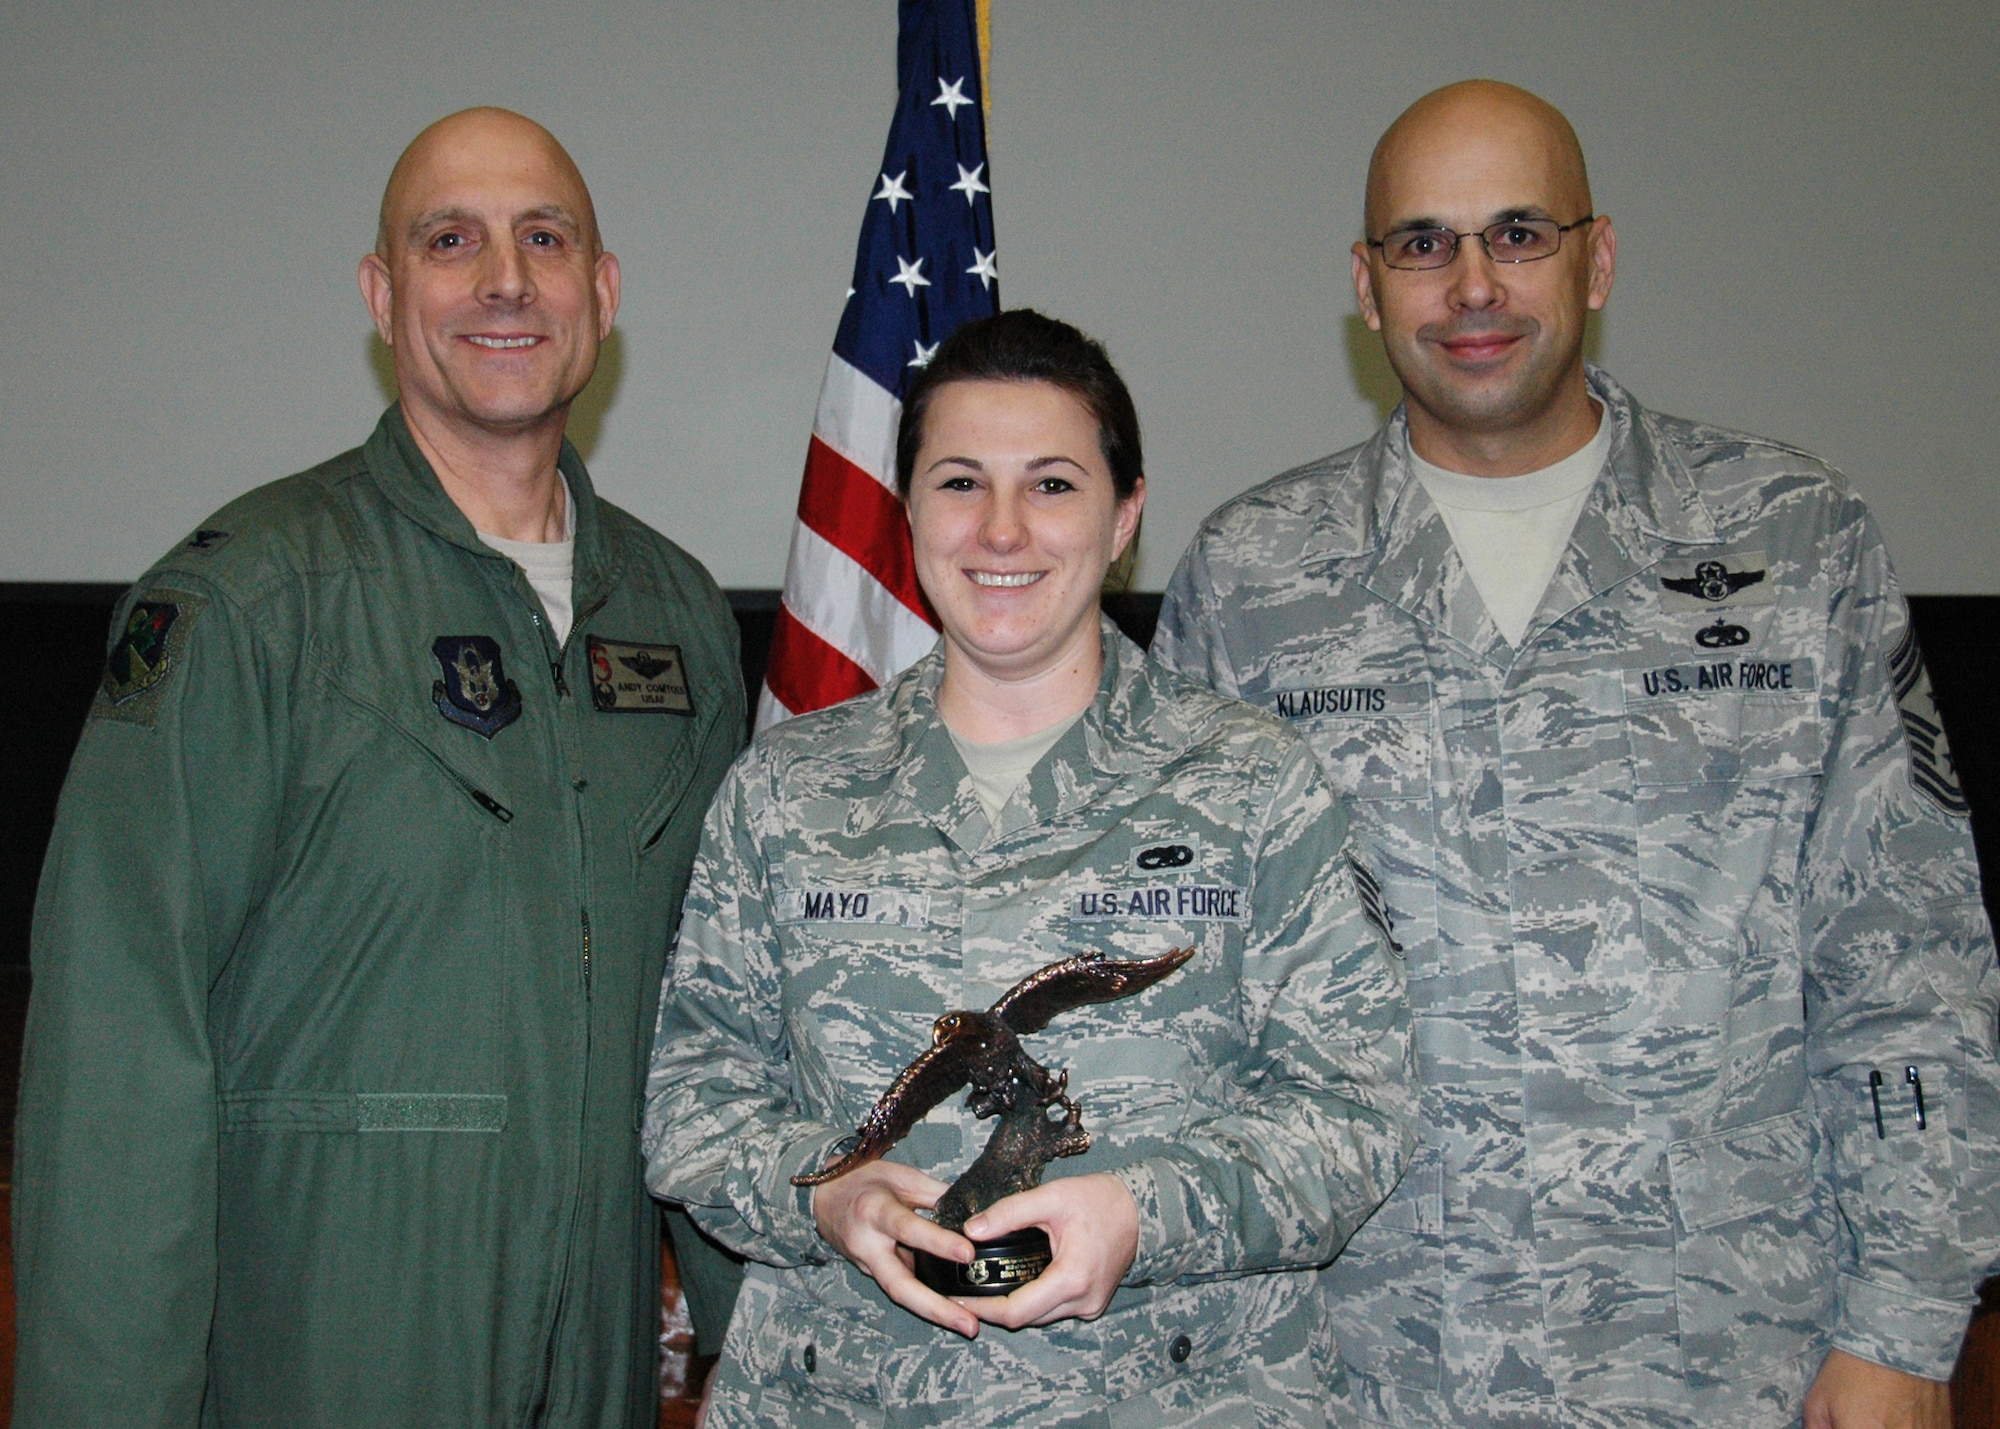 Staff Sgt. Mary Mayo of the 919th Maintenance Operations Flight was named 919th Special Operations Wing NCO of the Year for 2011 during the wing's March unit training assembly at Duke Field.  Flanking her are Col. Andy Comtois, 919th SOW commander, left, and Chief Master Sgt. Michael Klausutis, 919th SOW command chief, who likewise honored their most outstanding Citizen Commandos in the Airman, Senior NCO and company grade officer categories.  (U.S. Air Force photo/Dan Neely)